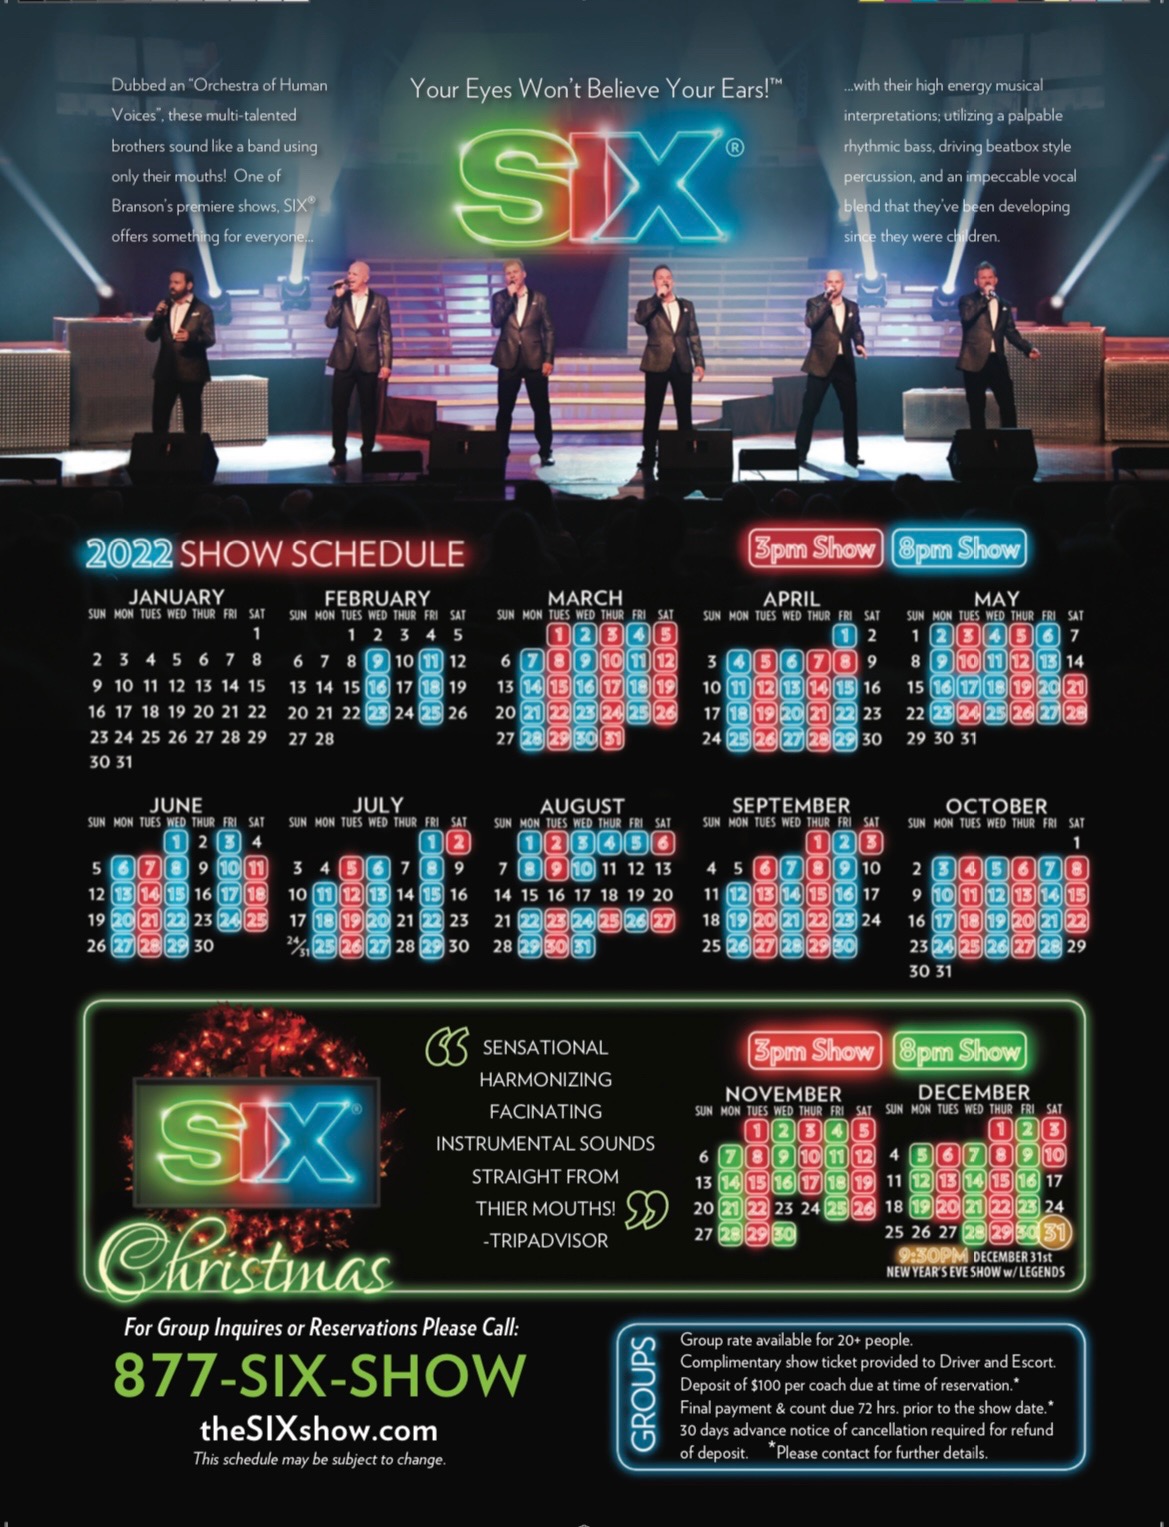 SIX show schedule for 2020 including Christmas show schedule